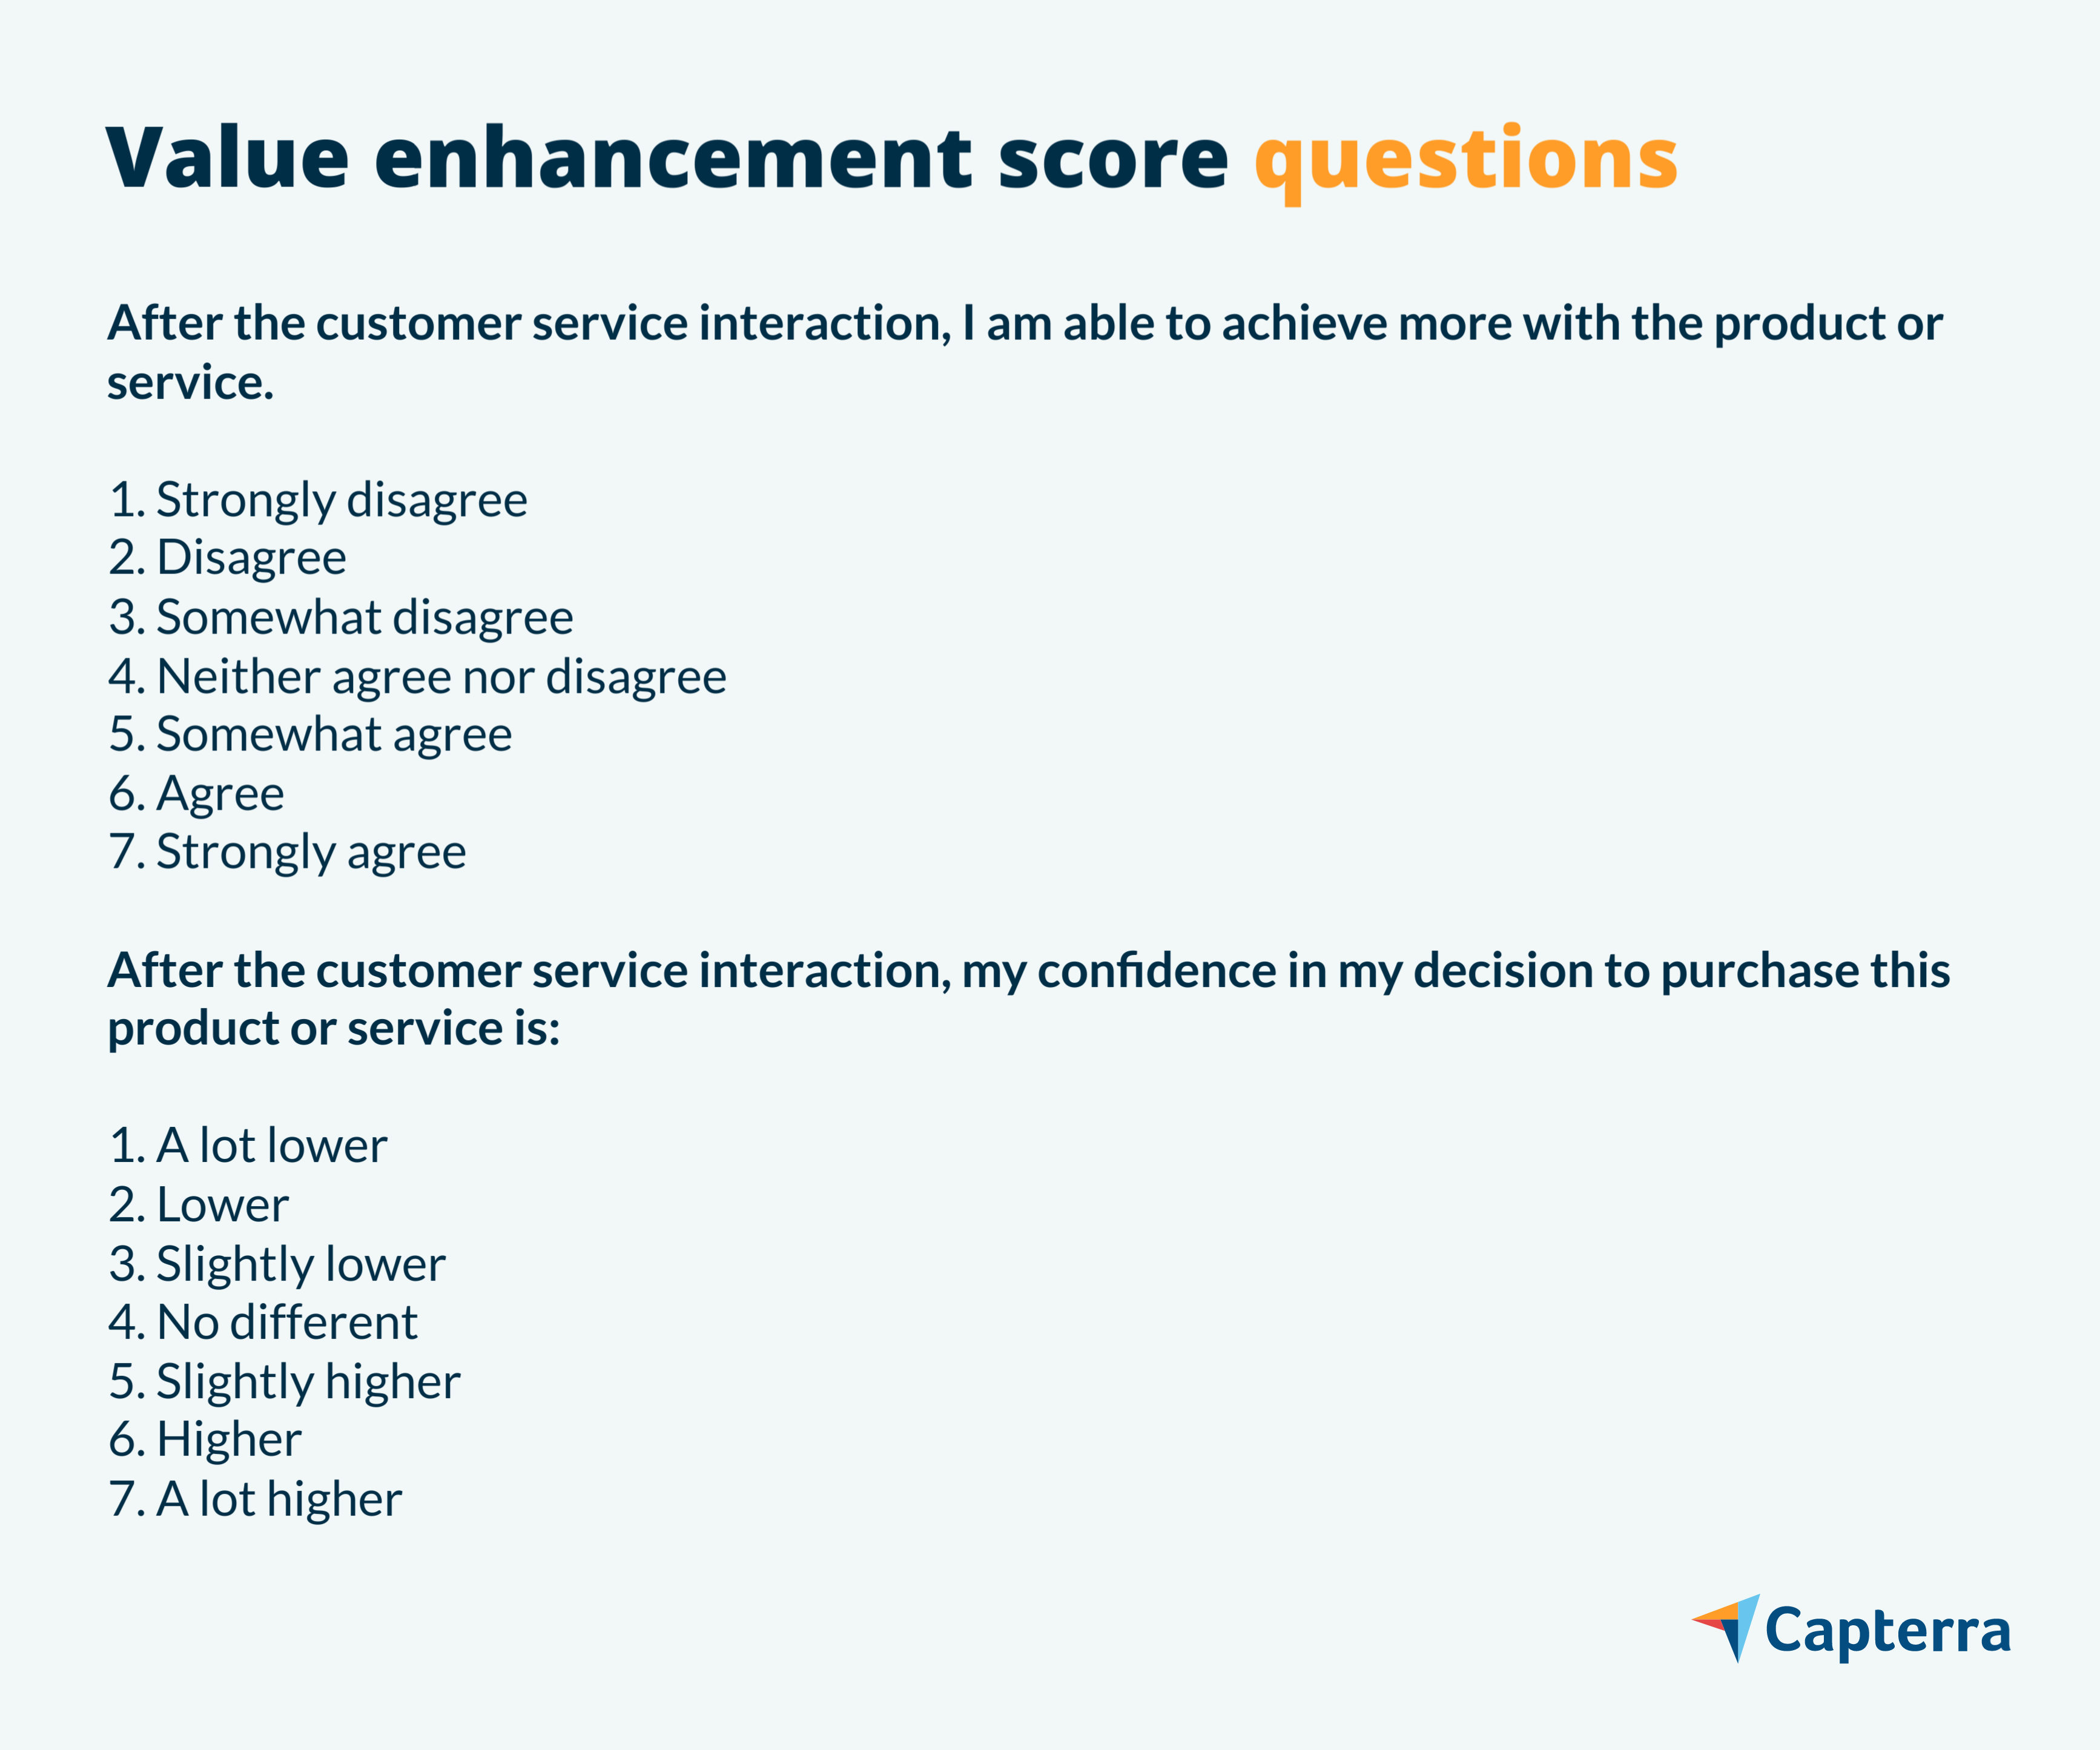 Value enhancement score questions graphic for the blog article "4 Retention Metrics Customer Service Teams Should Track"